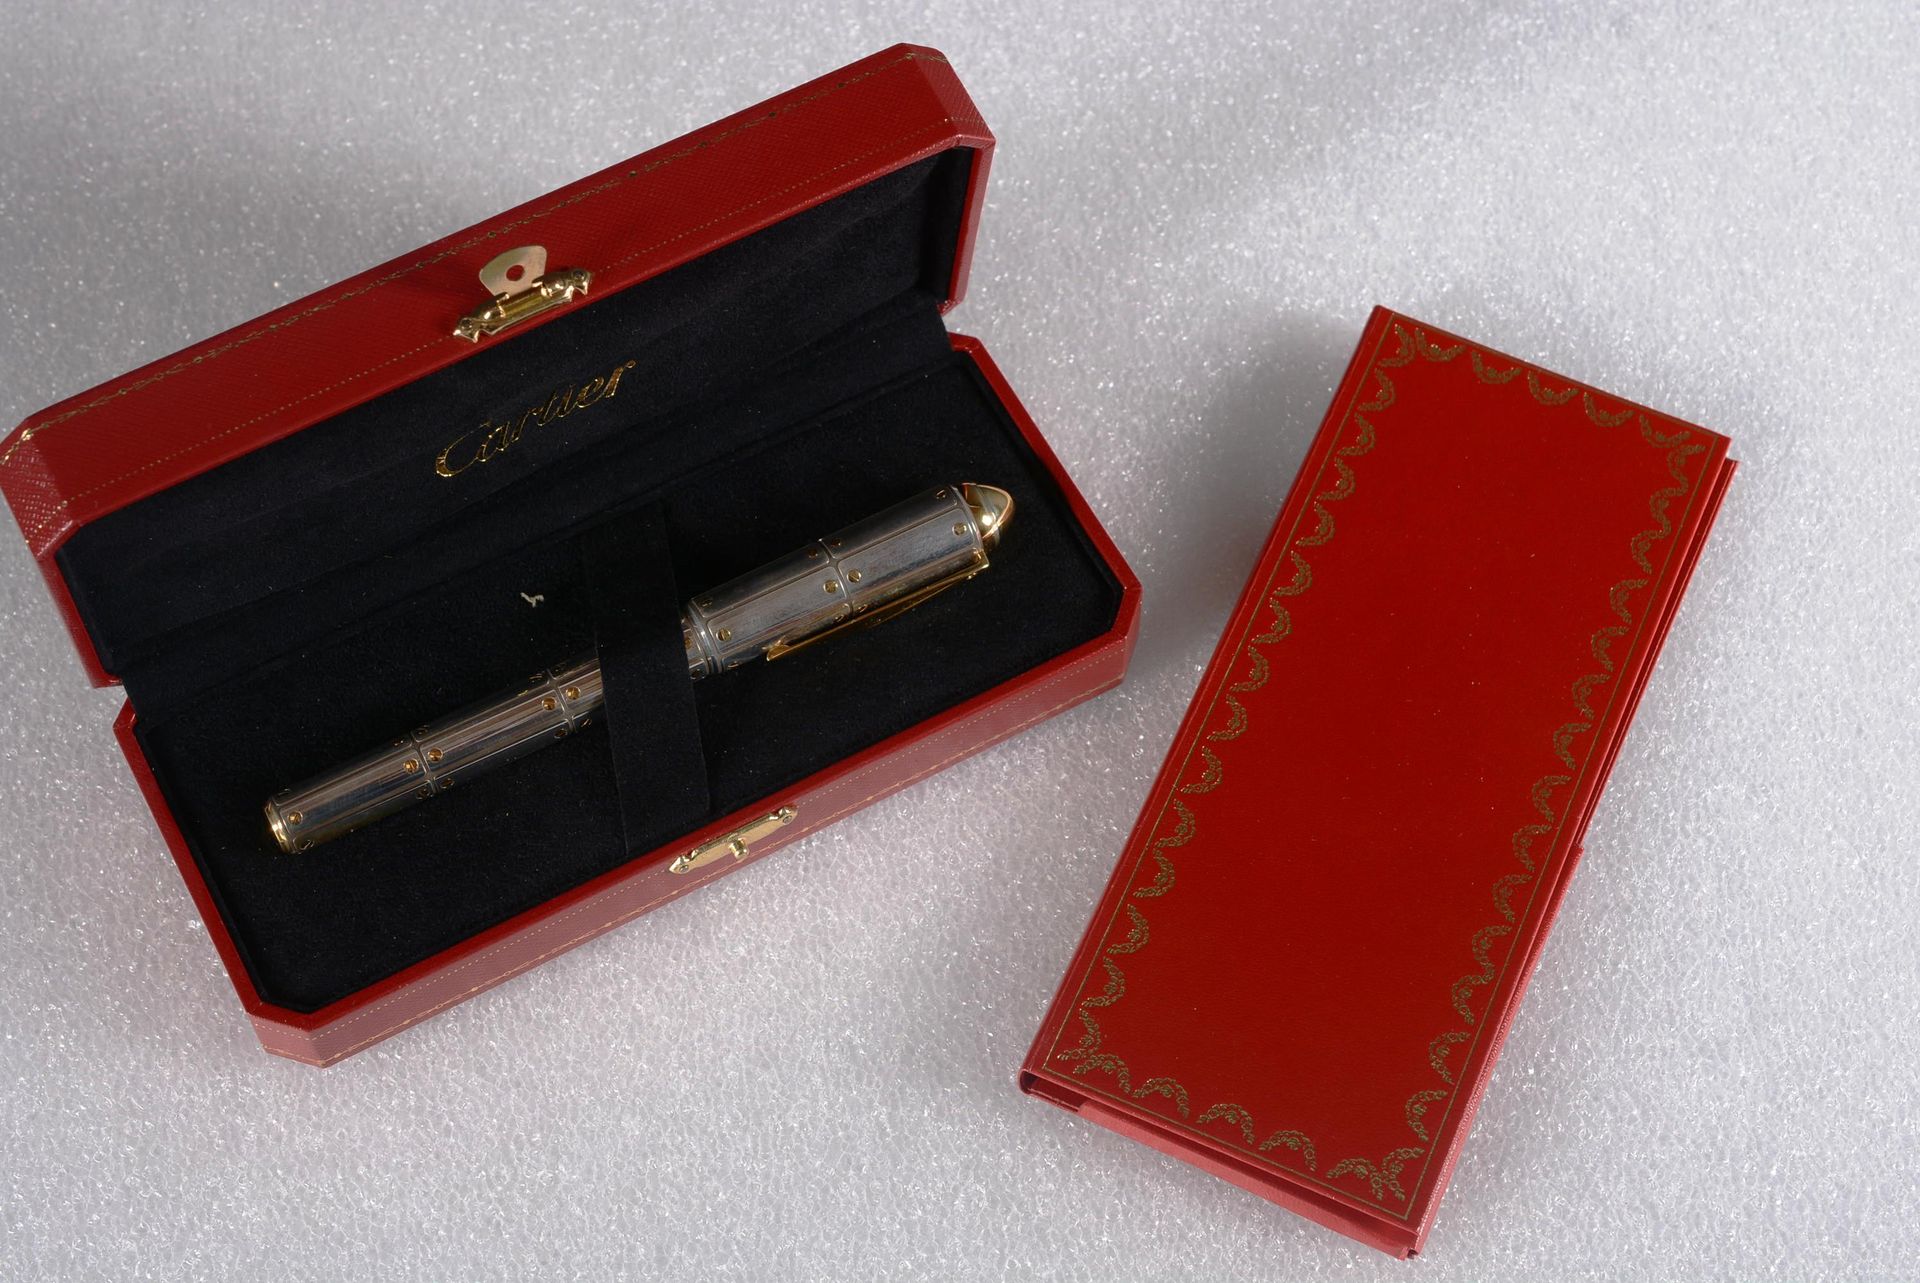 CARTIER. Stylo plume CARTIER.

Fountain pen in plated metal, produced in a limit&hellip;